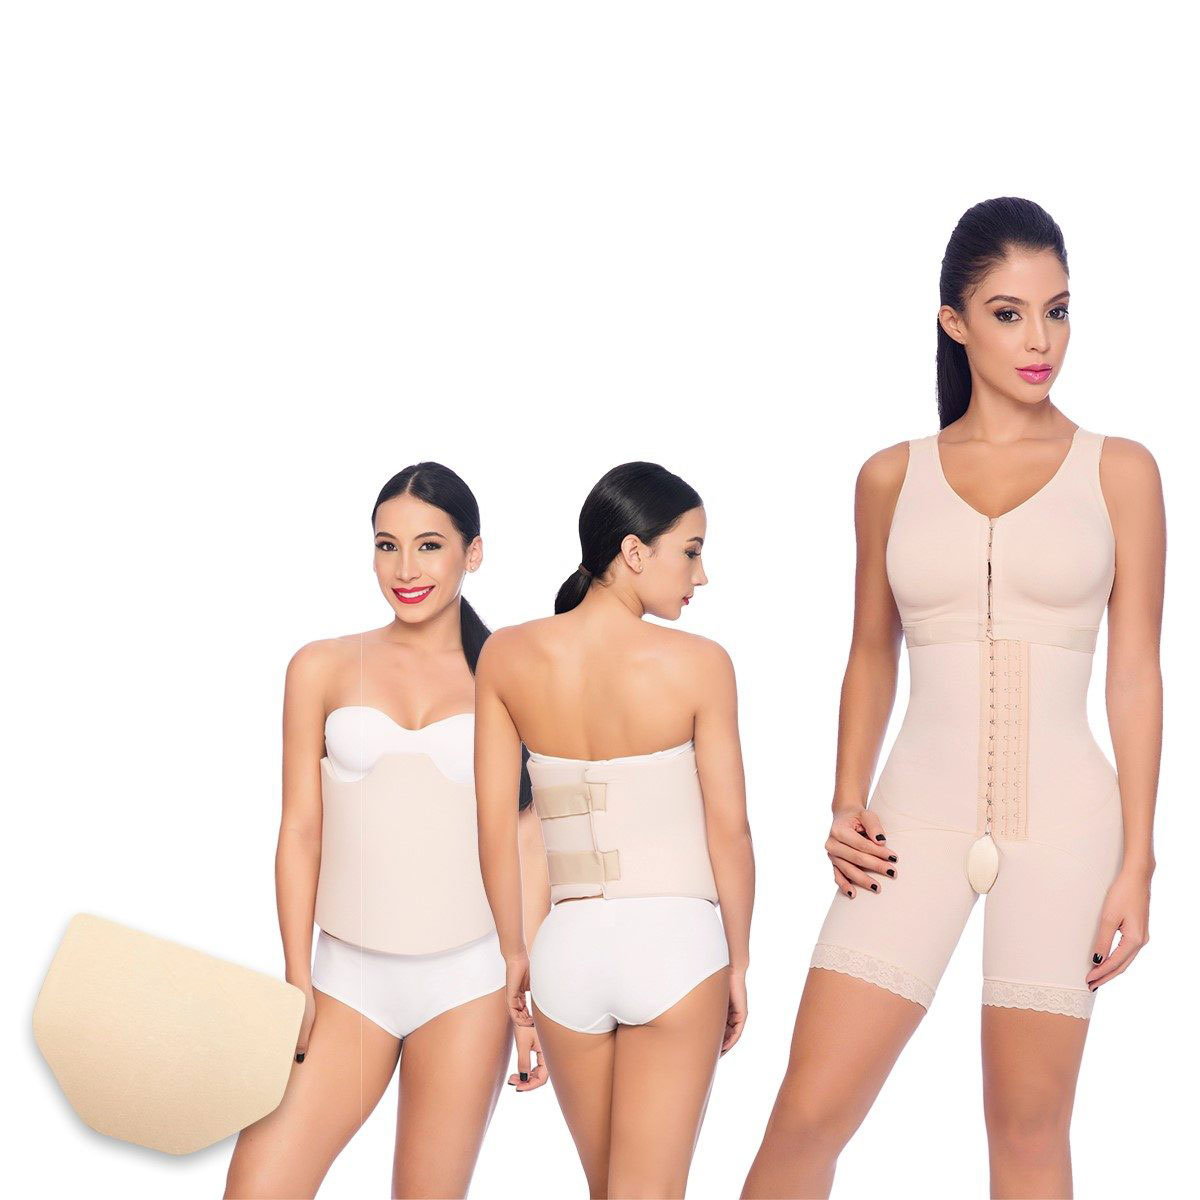 Blog - What is a post-op shapewear for?